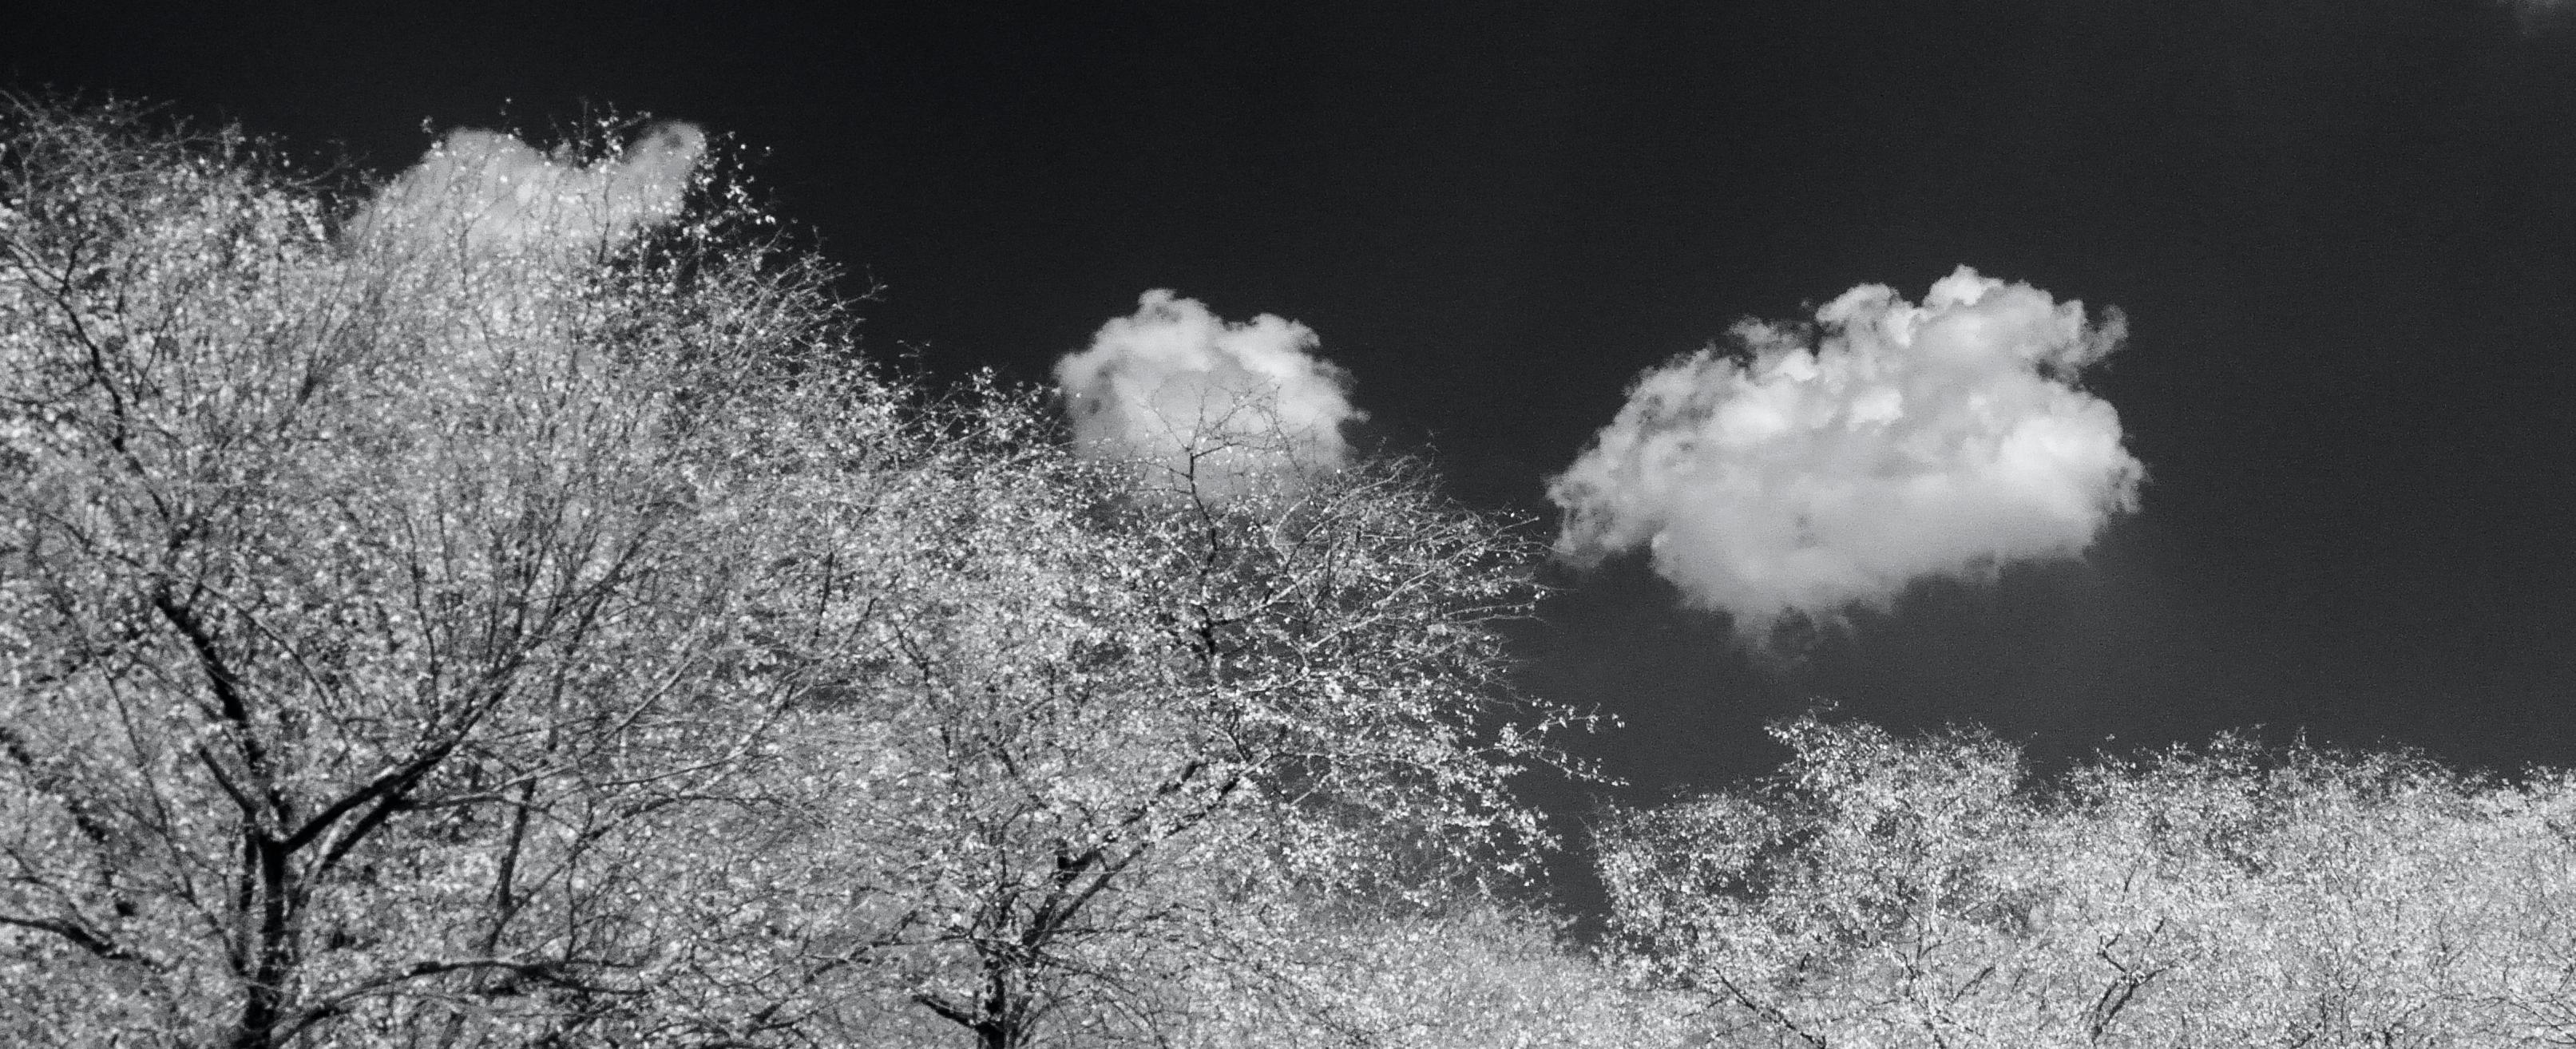 Surreal Black White Landscape Photograph Nature Wildlife India Trees Clouds For Sale 6